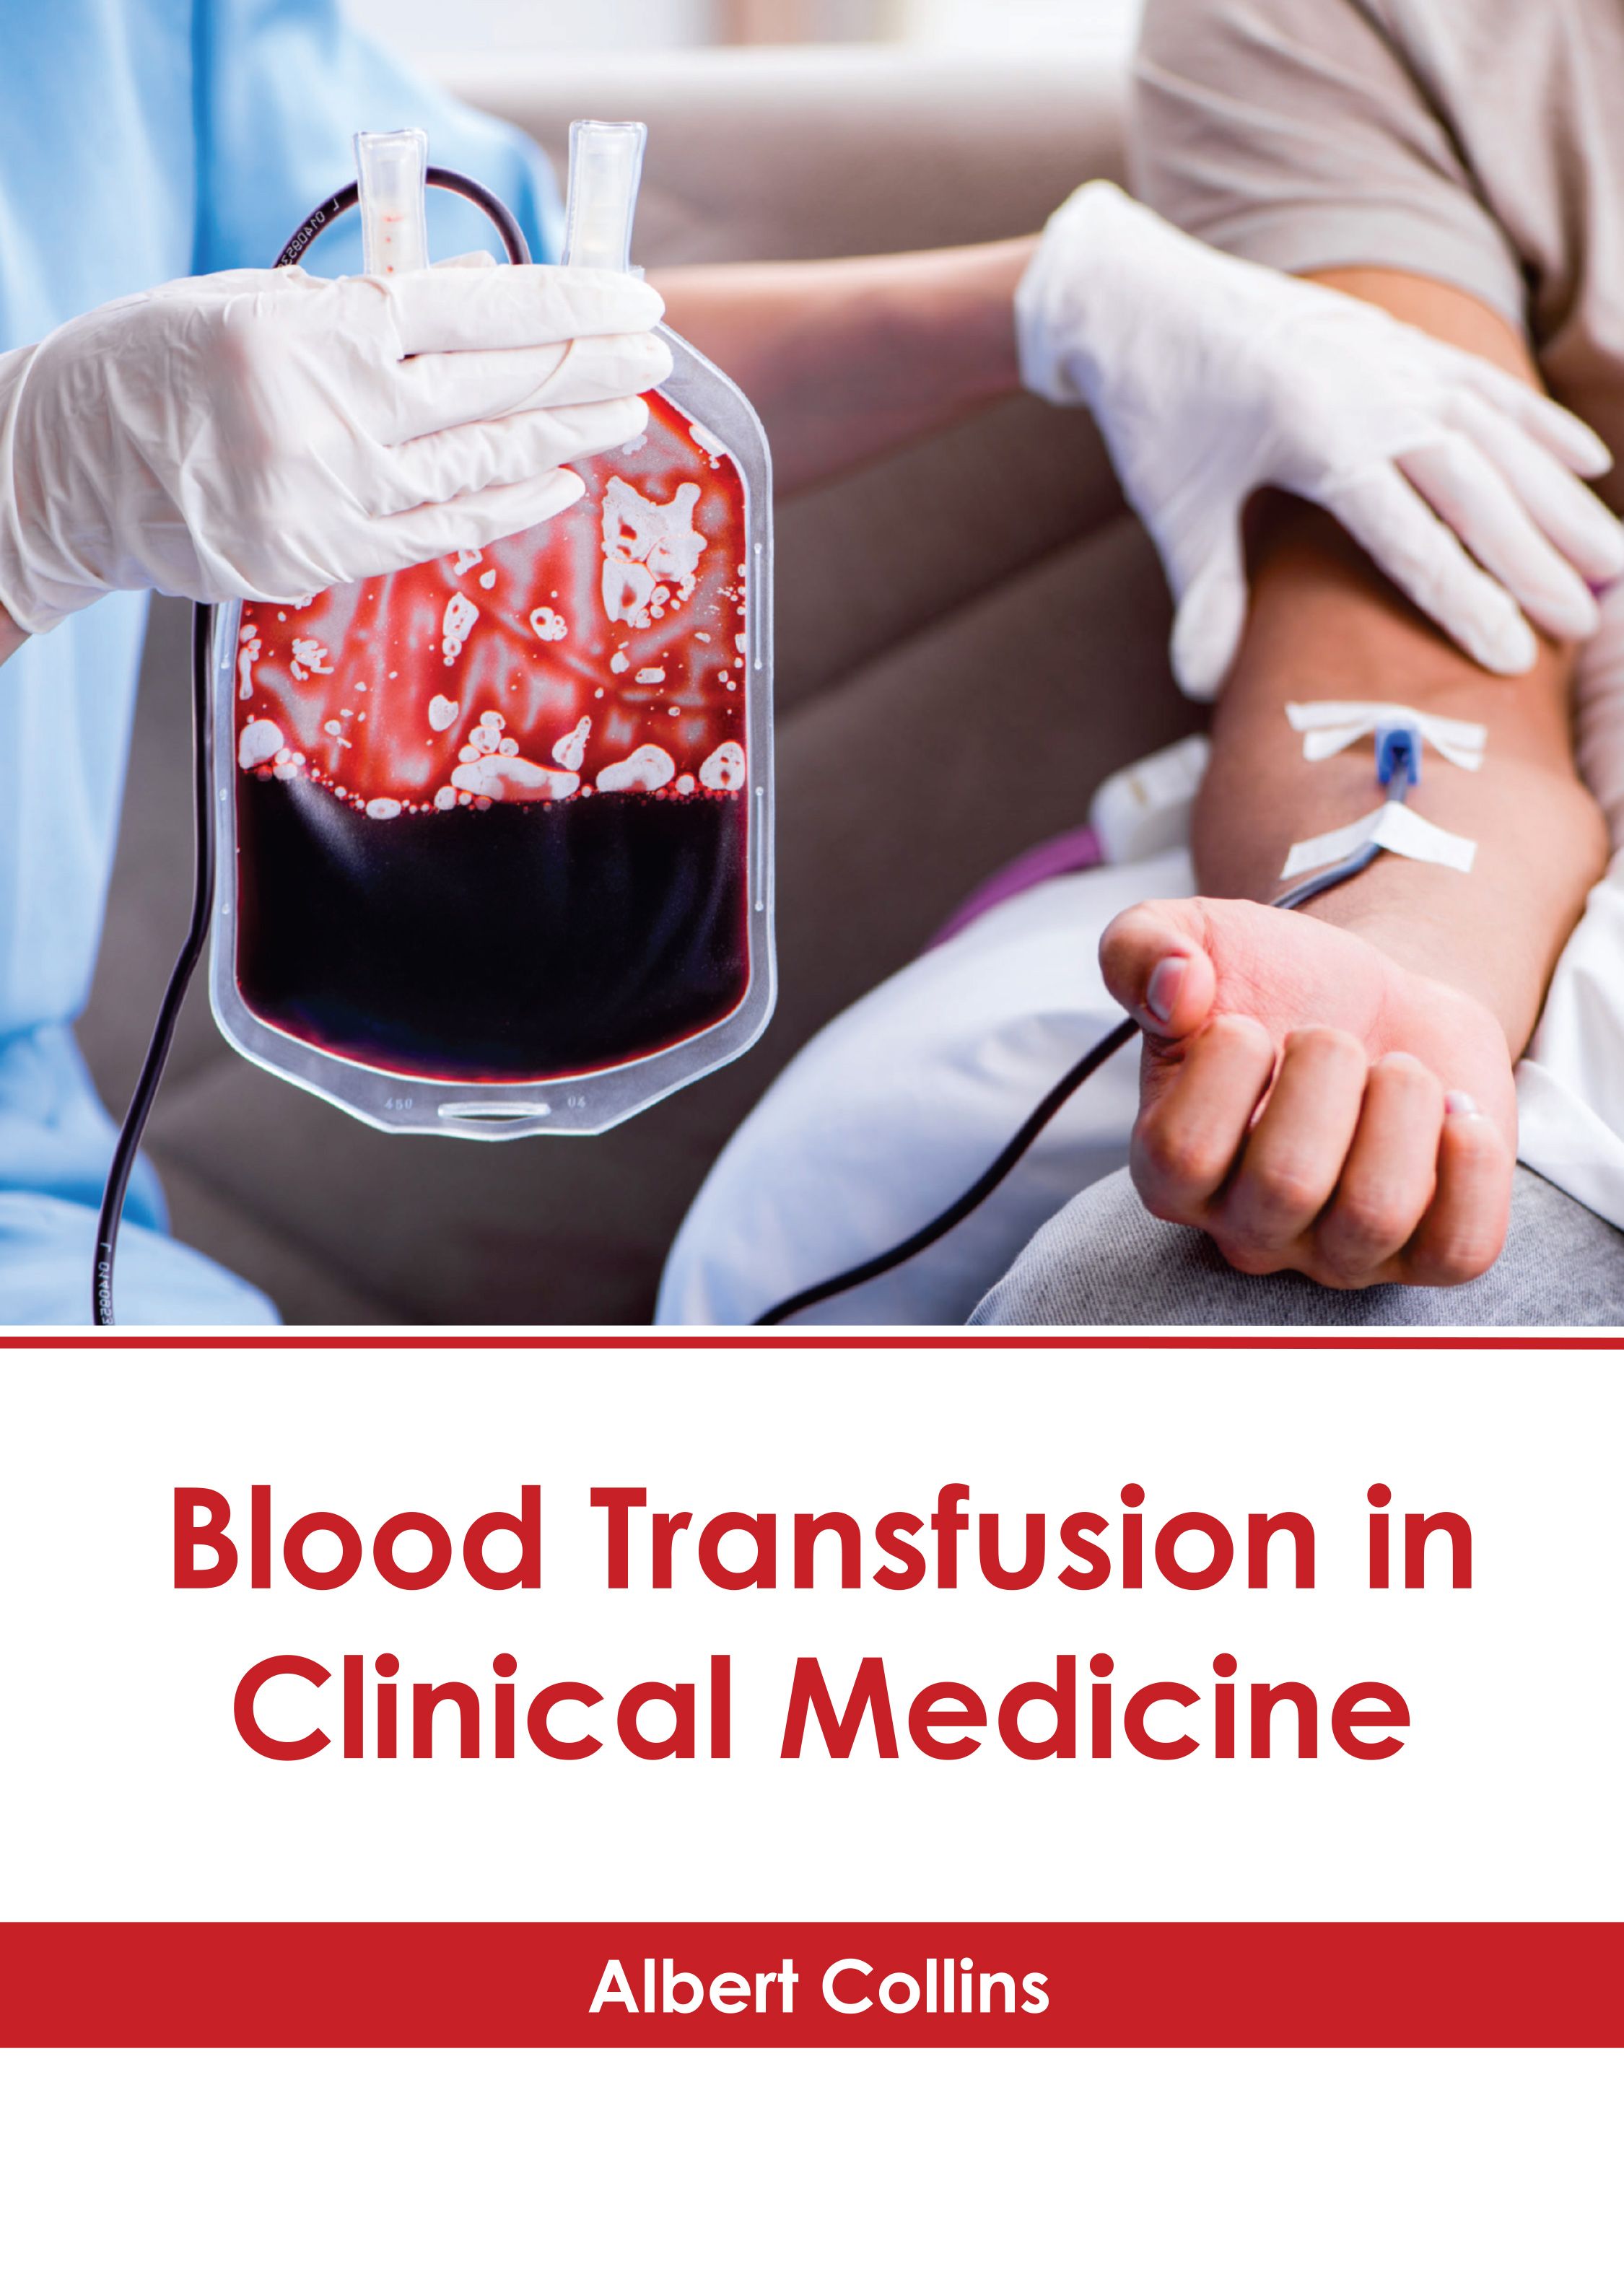 exclusive-publishers/american-medical-publishers/blood-transfusion-in-clinical-medicine-9781639279371